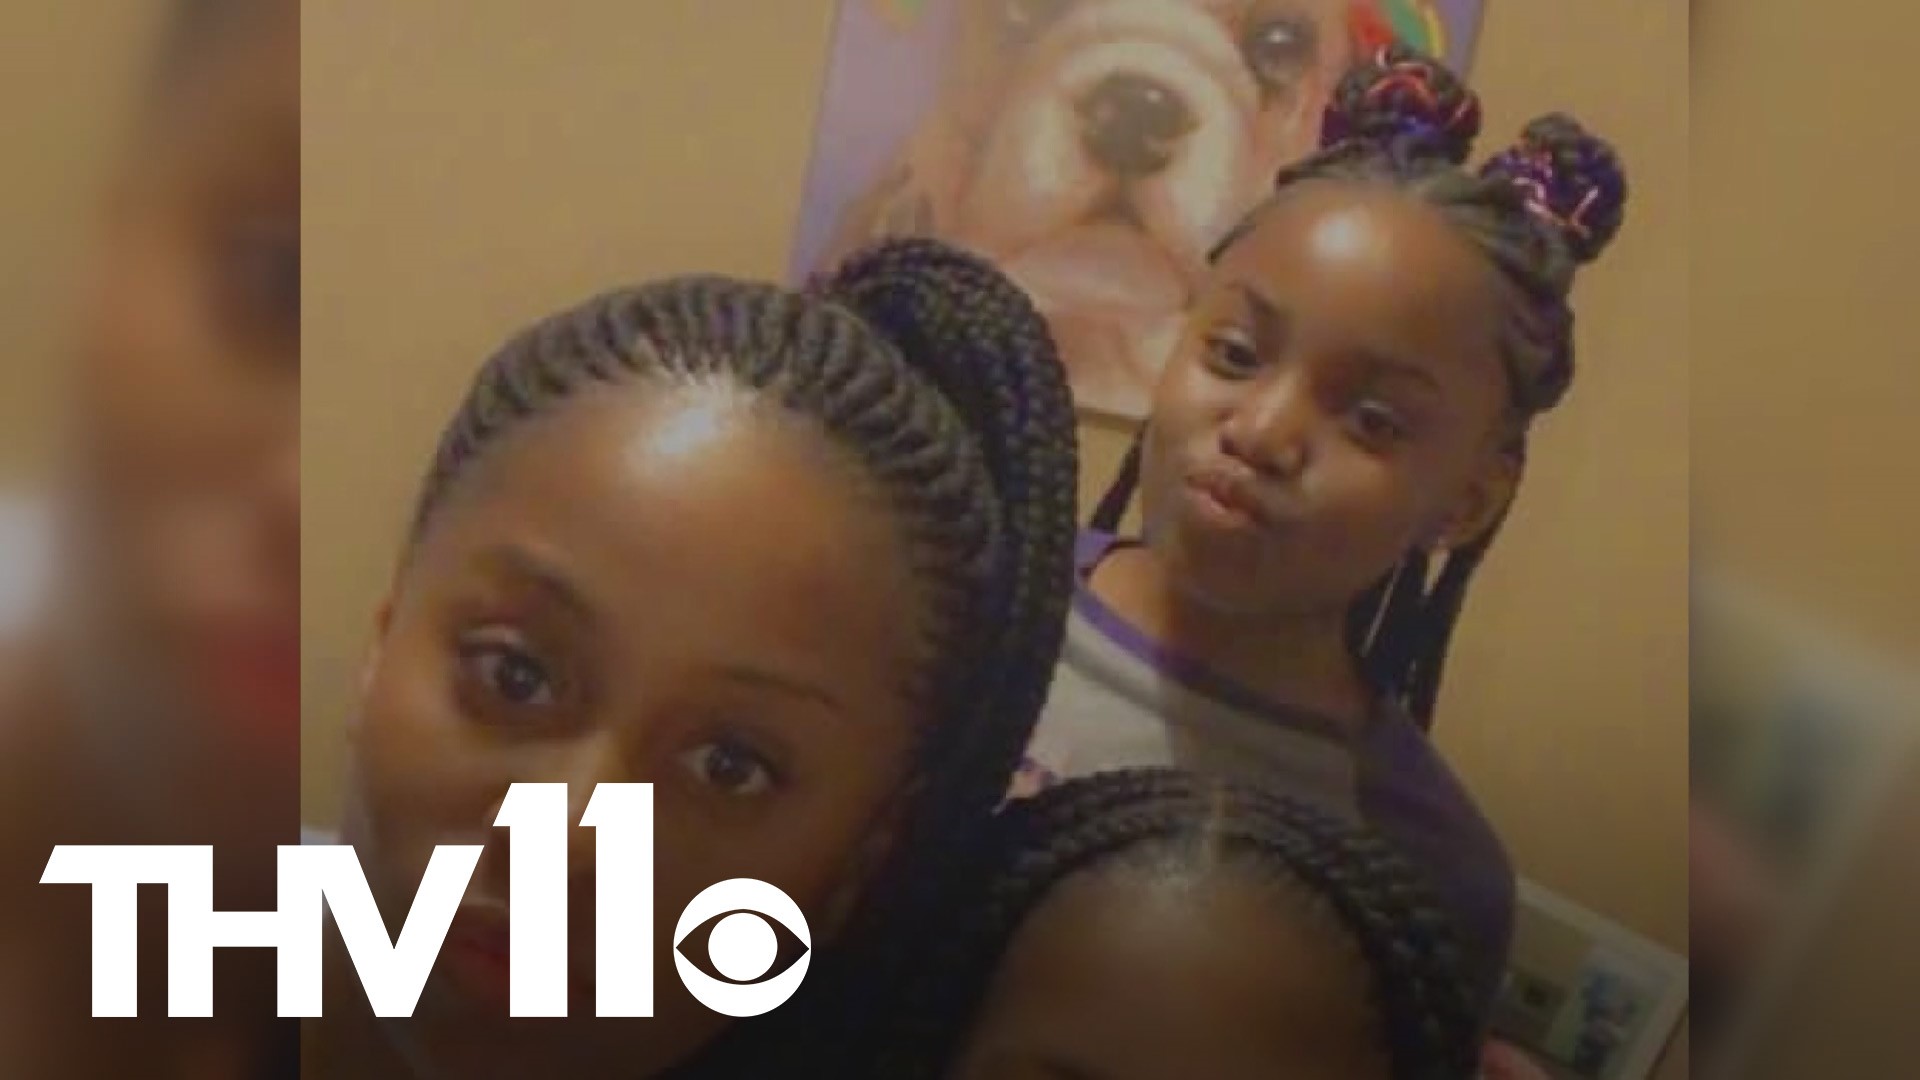 10-year old Ja'Aliyah Hughes was shot at Boyles Park Saturday afternoon. She later died in the hospital.